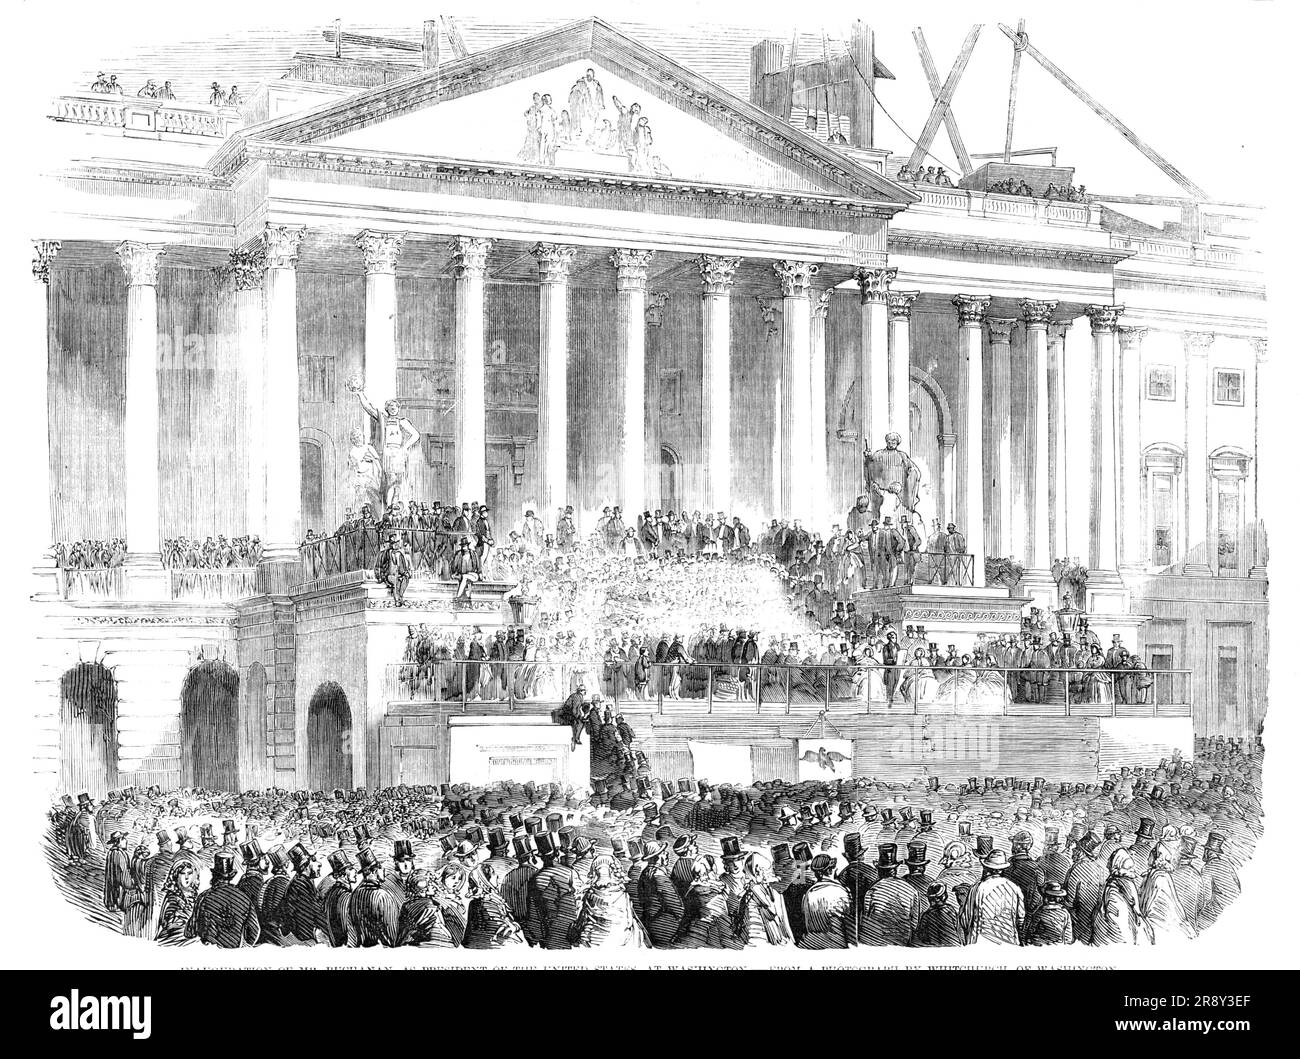 Inauguration of Mr. Buchanan, as President of the United States, at Washington - from a photograph by Whitchurch, 1857. View of '...the ceremony in front of the portico of the Capitol...engraved from a photograph by Whitchurch...Mr. Buchanan rose, and in a clear and strong voice, delivered the inaugural address. The President's remarks were frequently interrupted by loud applause; and on its conclusion cheer after cheer greeted the speaker. The oath of office was administered by the venerable Chief Justice; after which the members of the Senate, preceded by the Vice-President, Secretary, and S Stock Photo